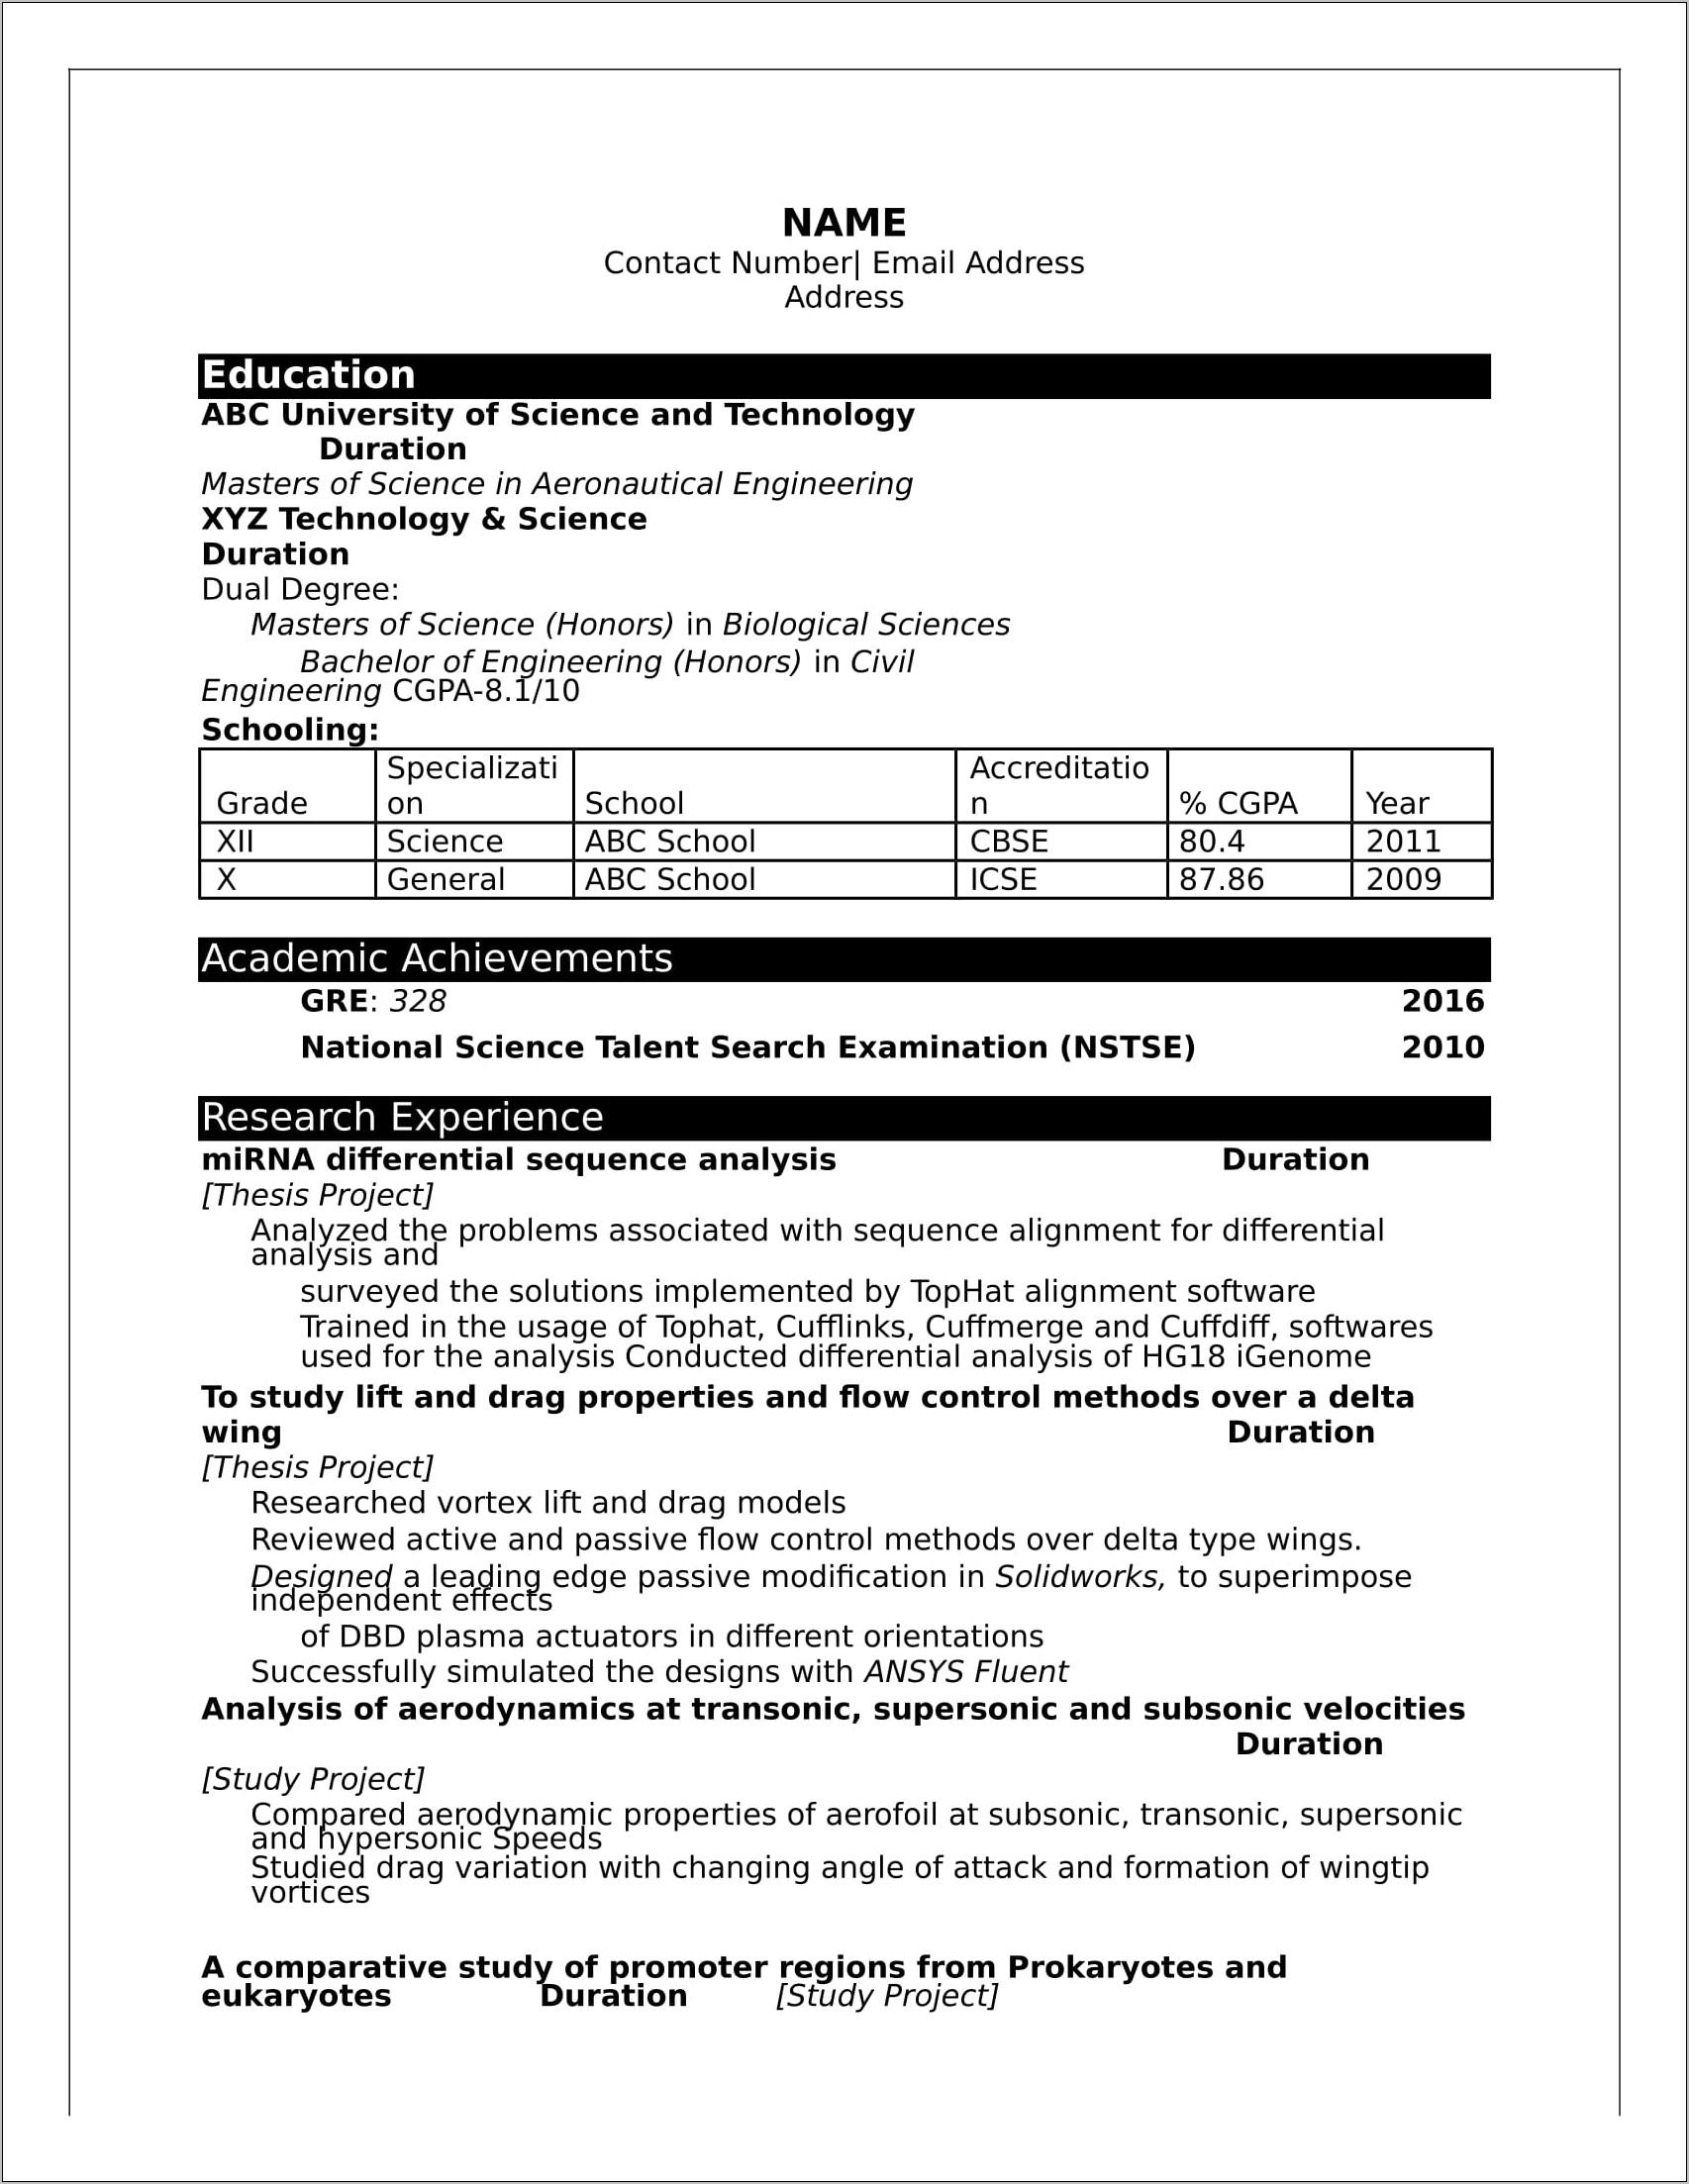 Resume Format Templates Free Download